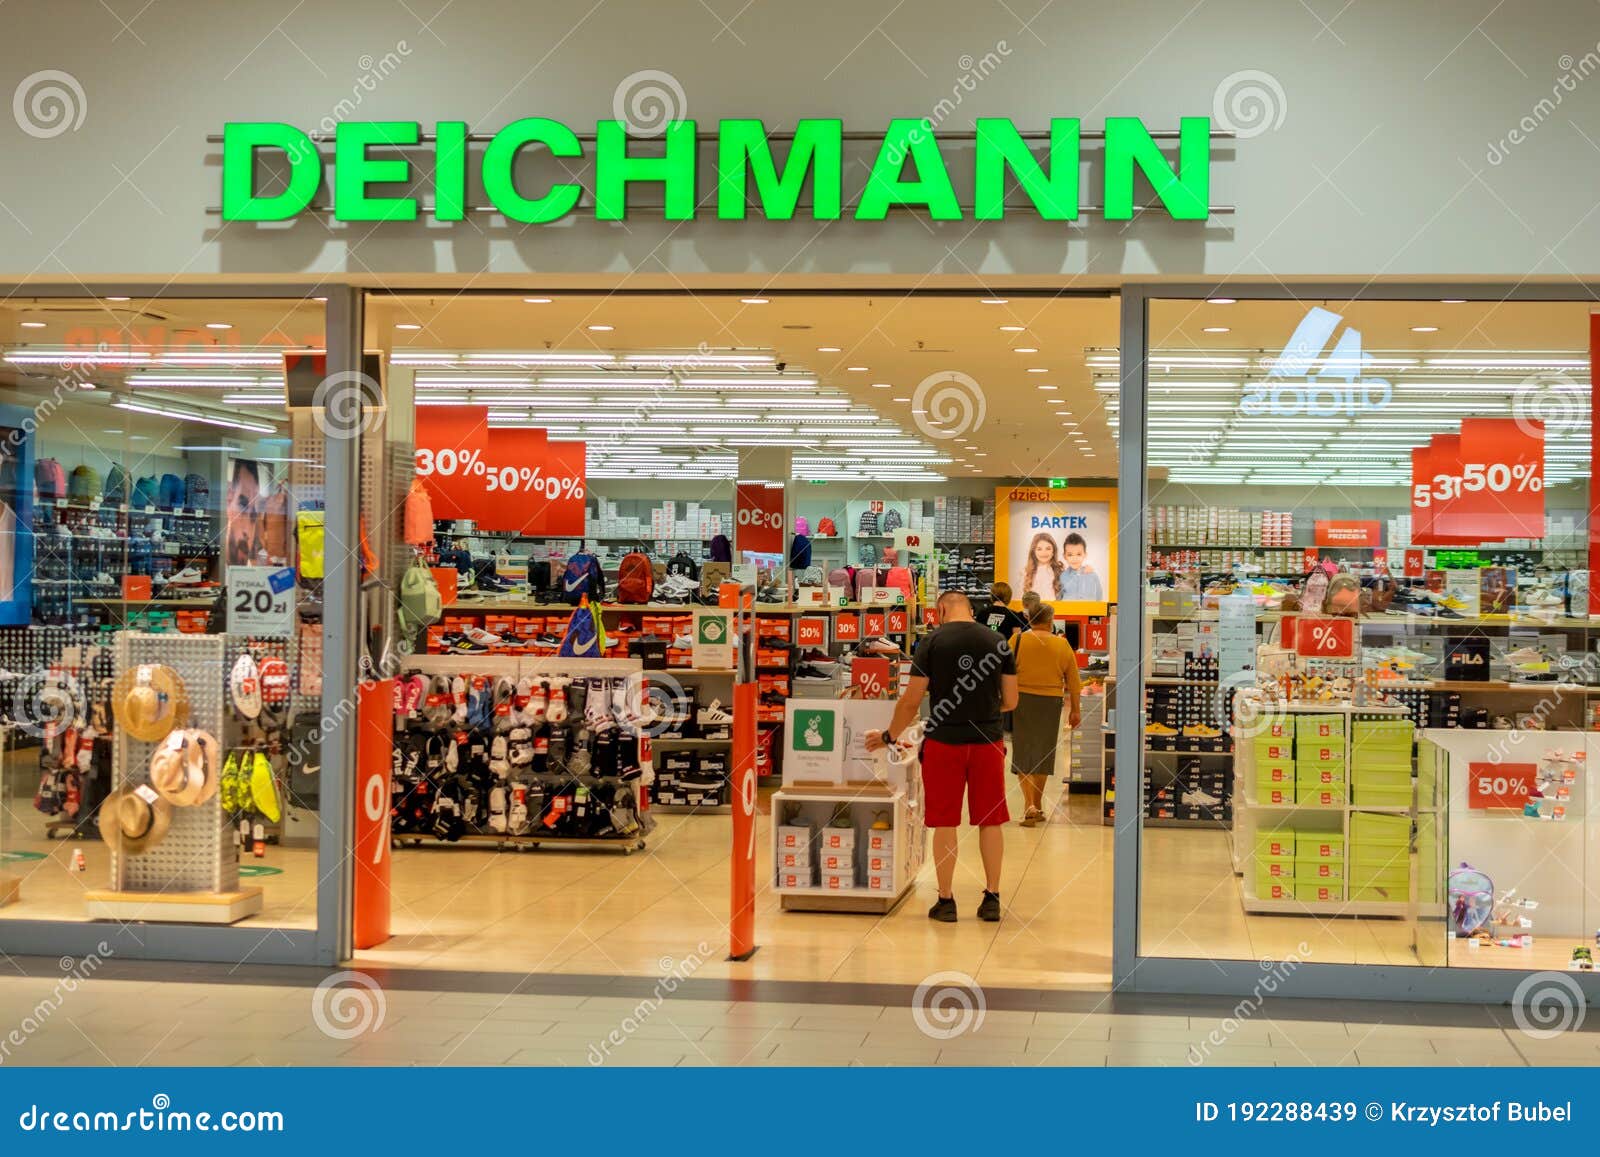 Deichmann Shoe Store Photos Free & Stock from Dreamstime